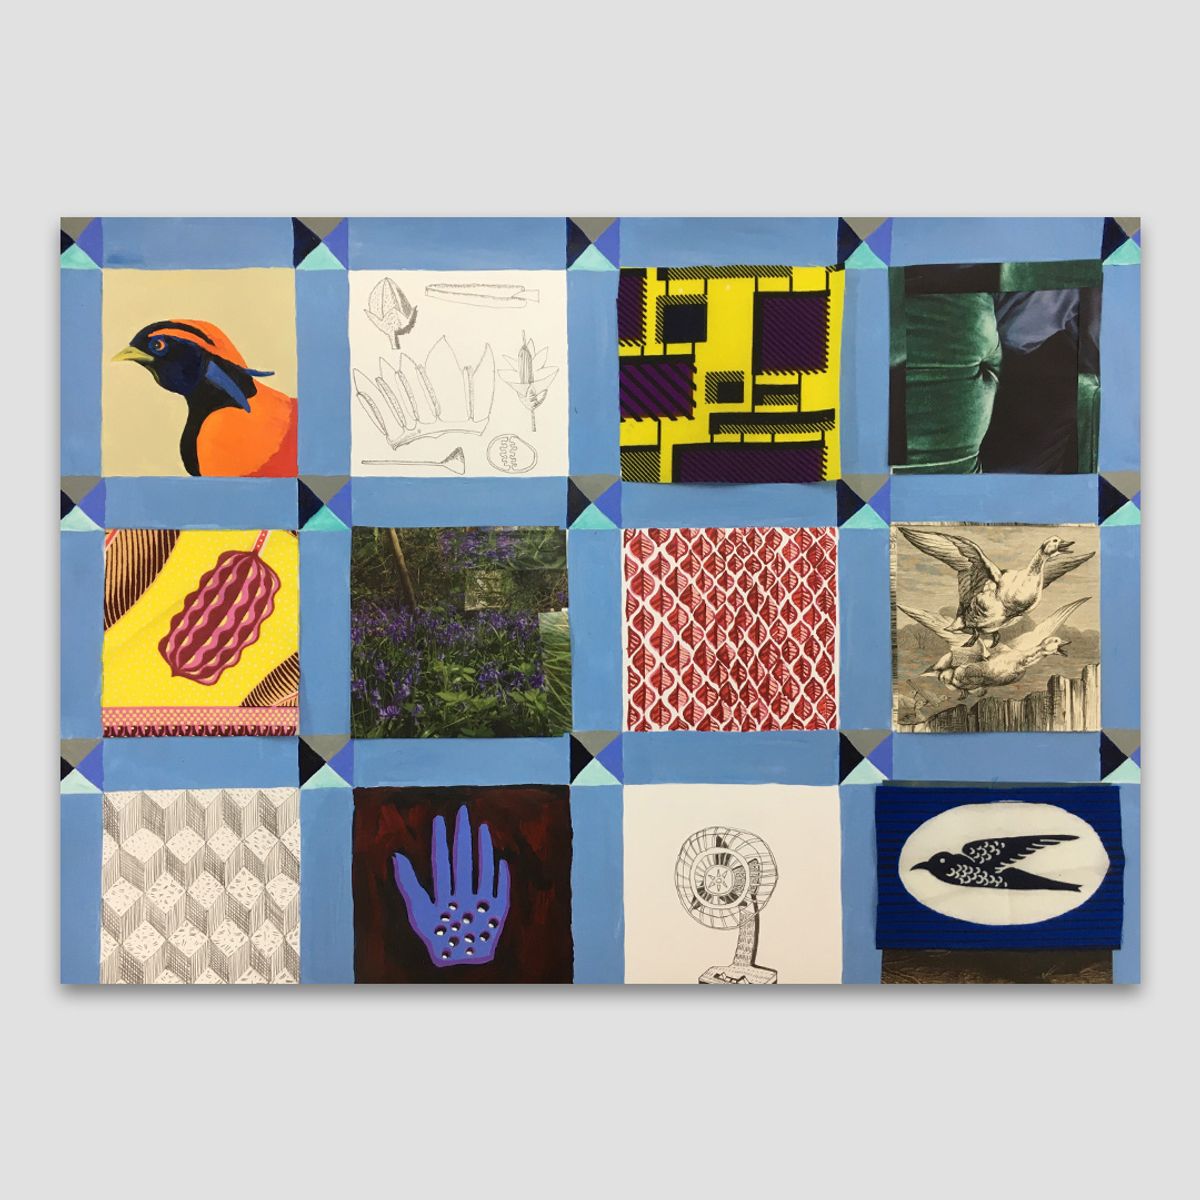 Lubaina Himid's limited-edition print, The Blanket of Reasonable Luxury (2020), from a painting made especially for Art Fund's #TogetherForMuseums crowdfunding campaign Courtesy of Art Fund